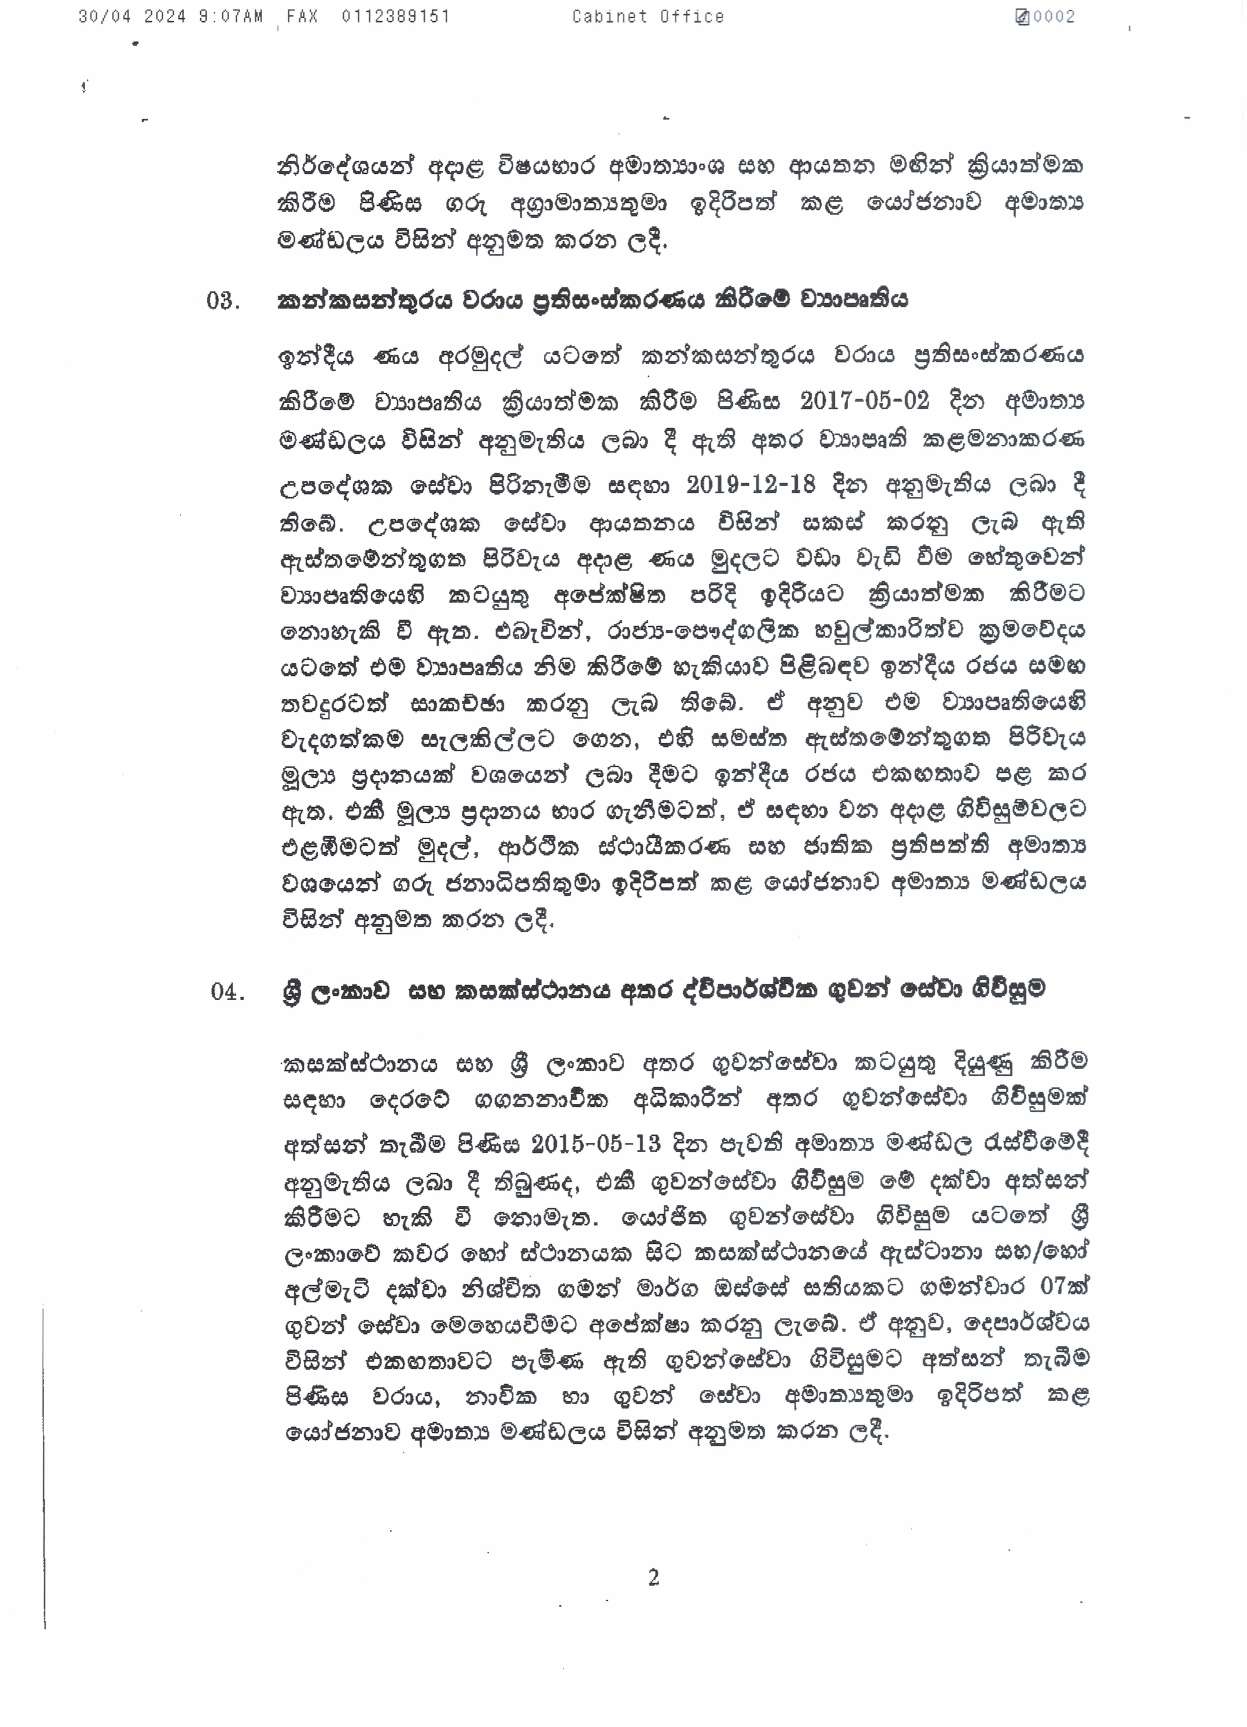 Cabinet Decision on 29.04.2024 page 0002